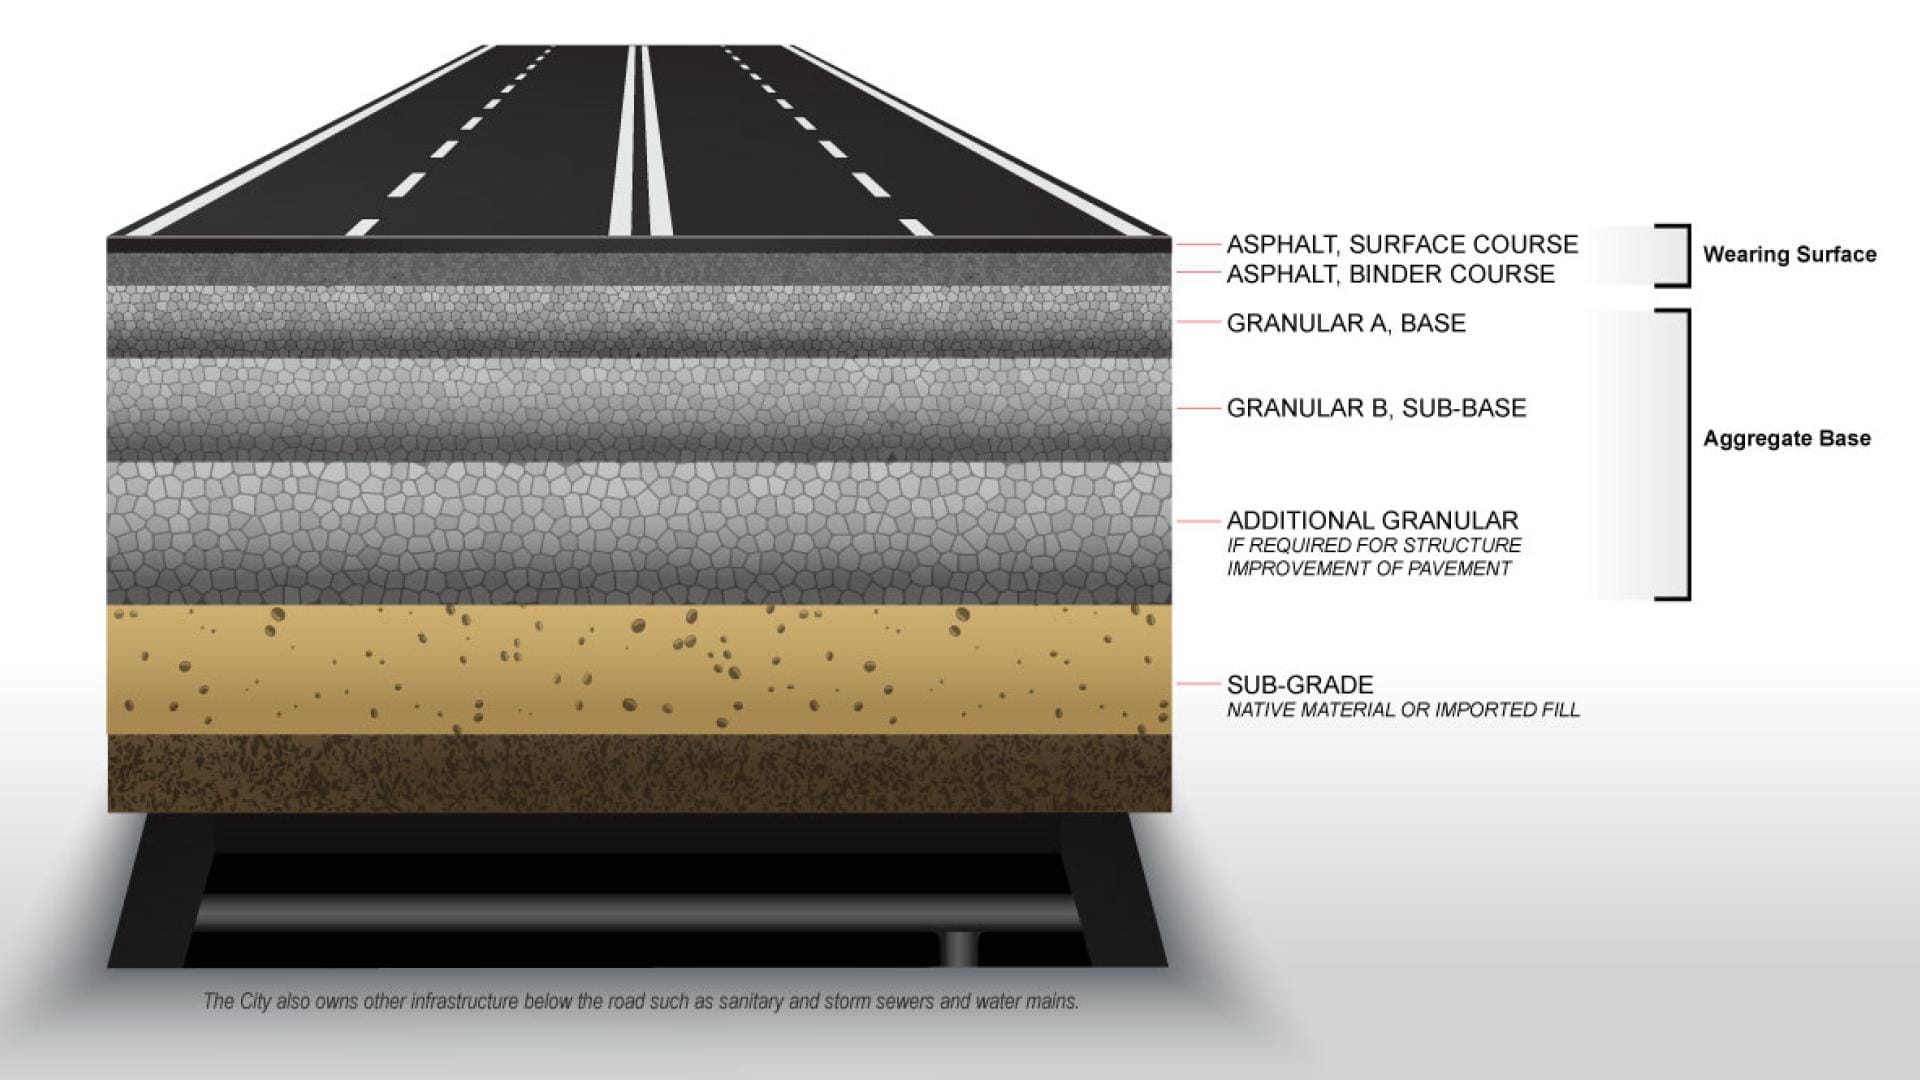 Diagram detailing the different pavement layers